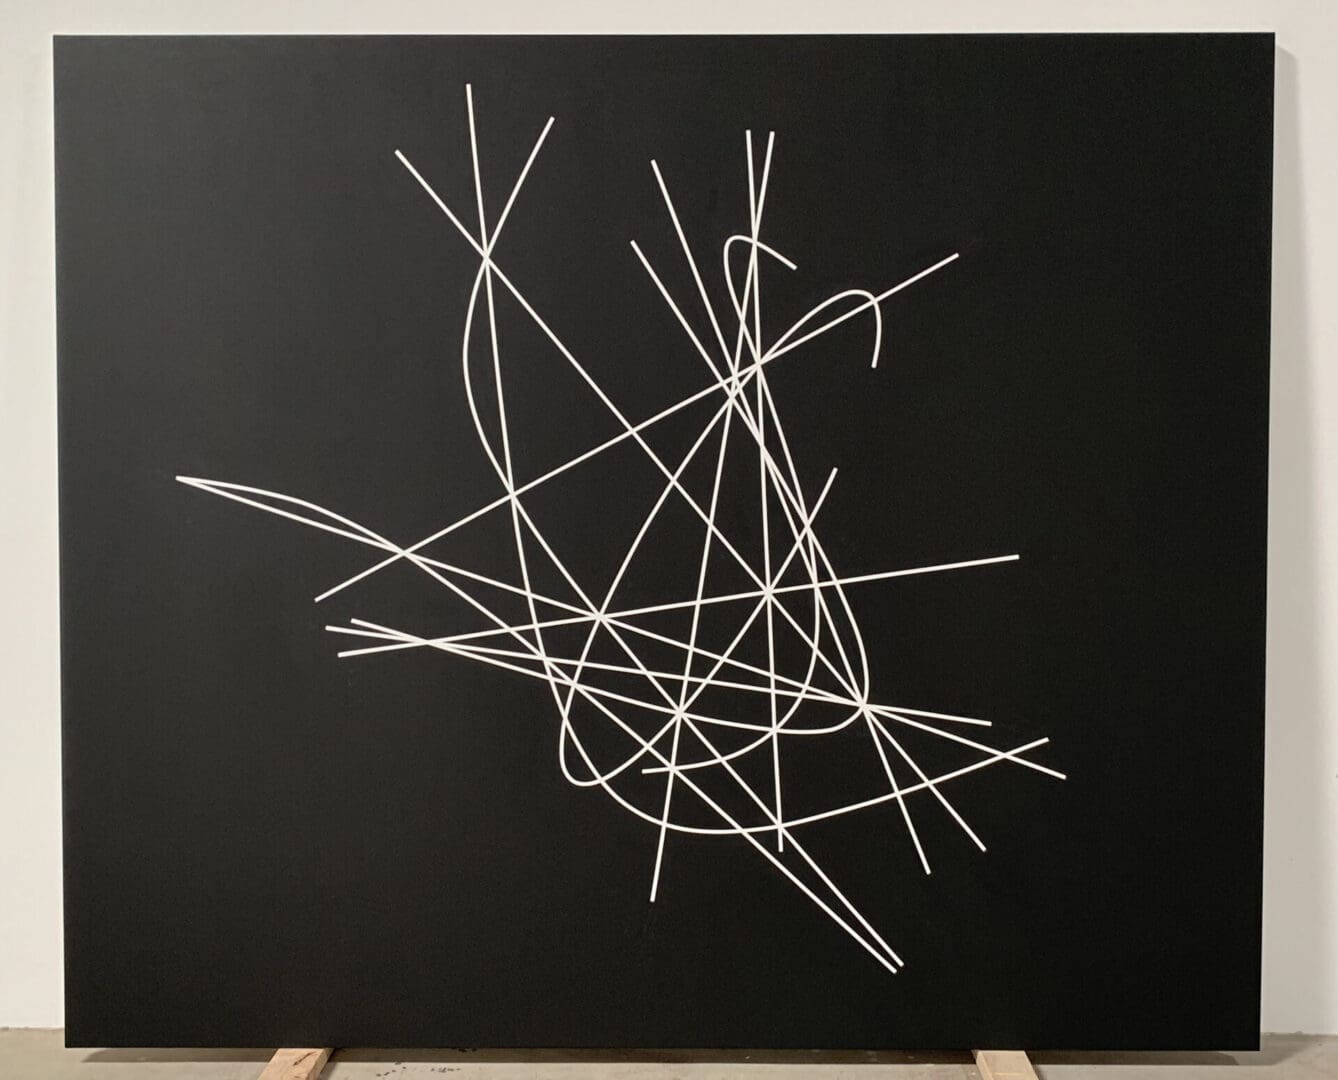 Clifford Singer. Osculating Ellipse at a Point on Space Curve. 2019. Acrylic on Canvas. 74 x 88 inches.